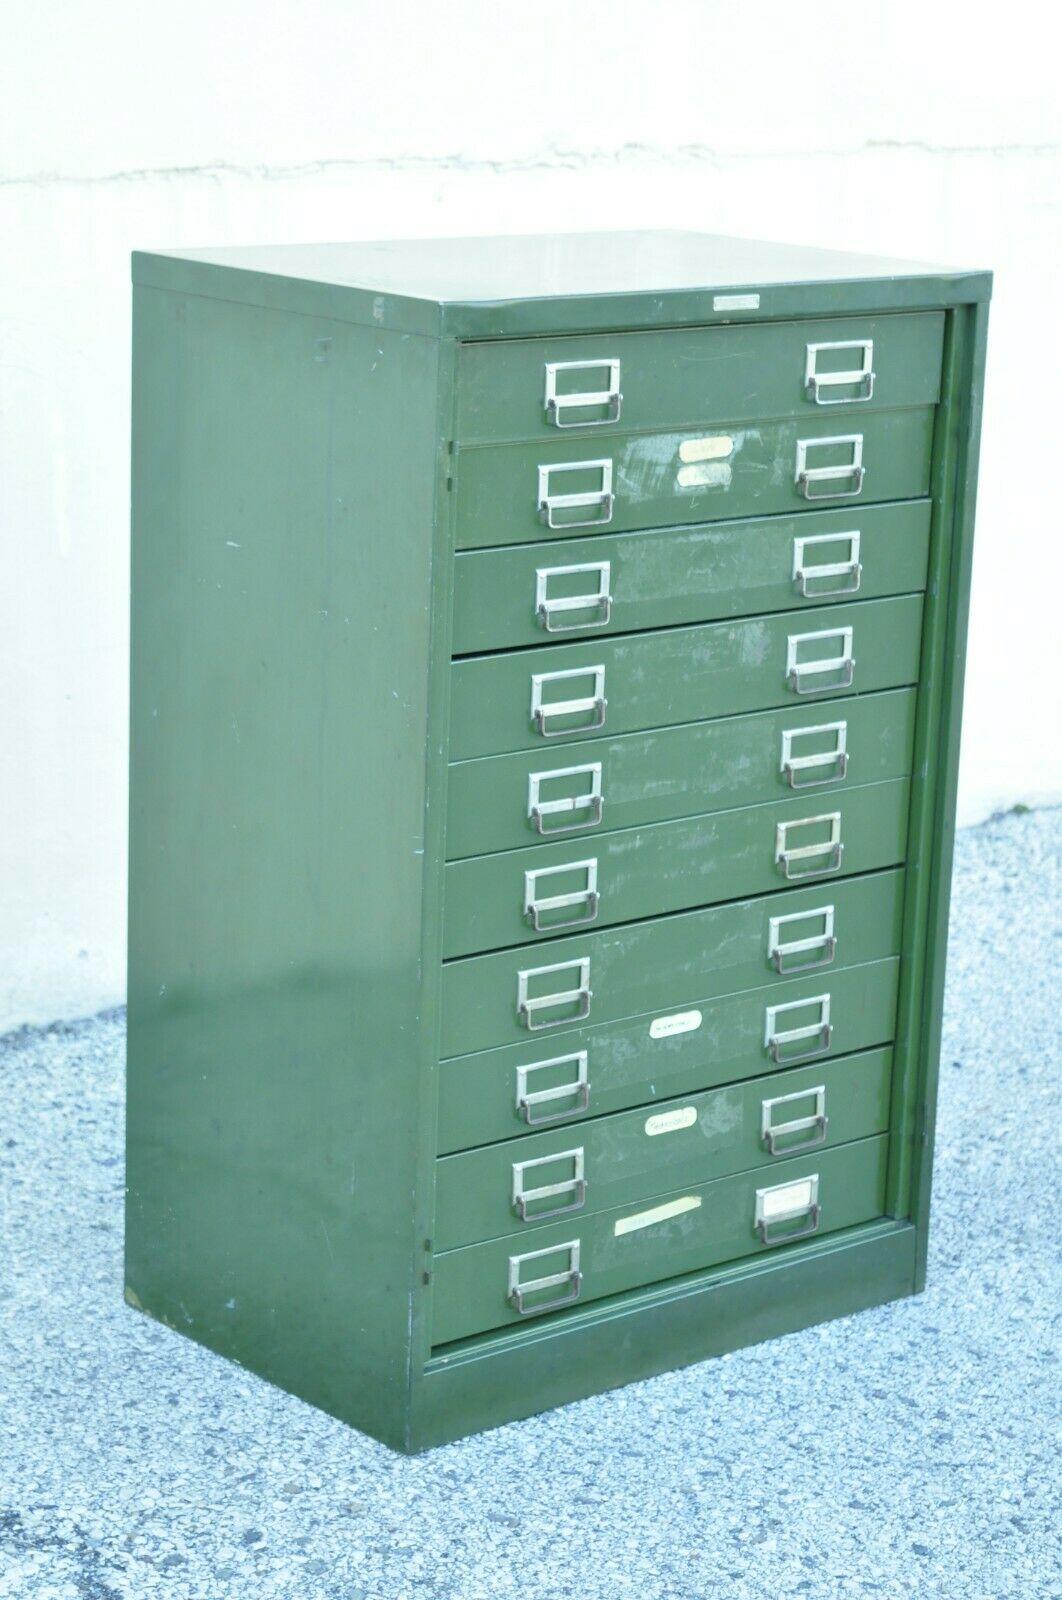 Vintage Steelmaster Green Steel metal 10 drawer tool parts cabinet file cabinet chest. Item features steel metal construction, green painted finish, original label, 10 drawers, quality American craftsmanship. Circa Mid 20th Century. Measurements: